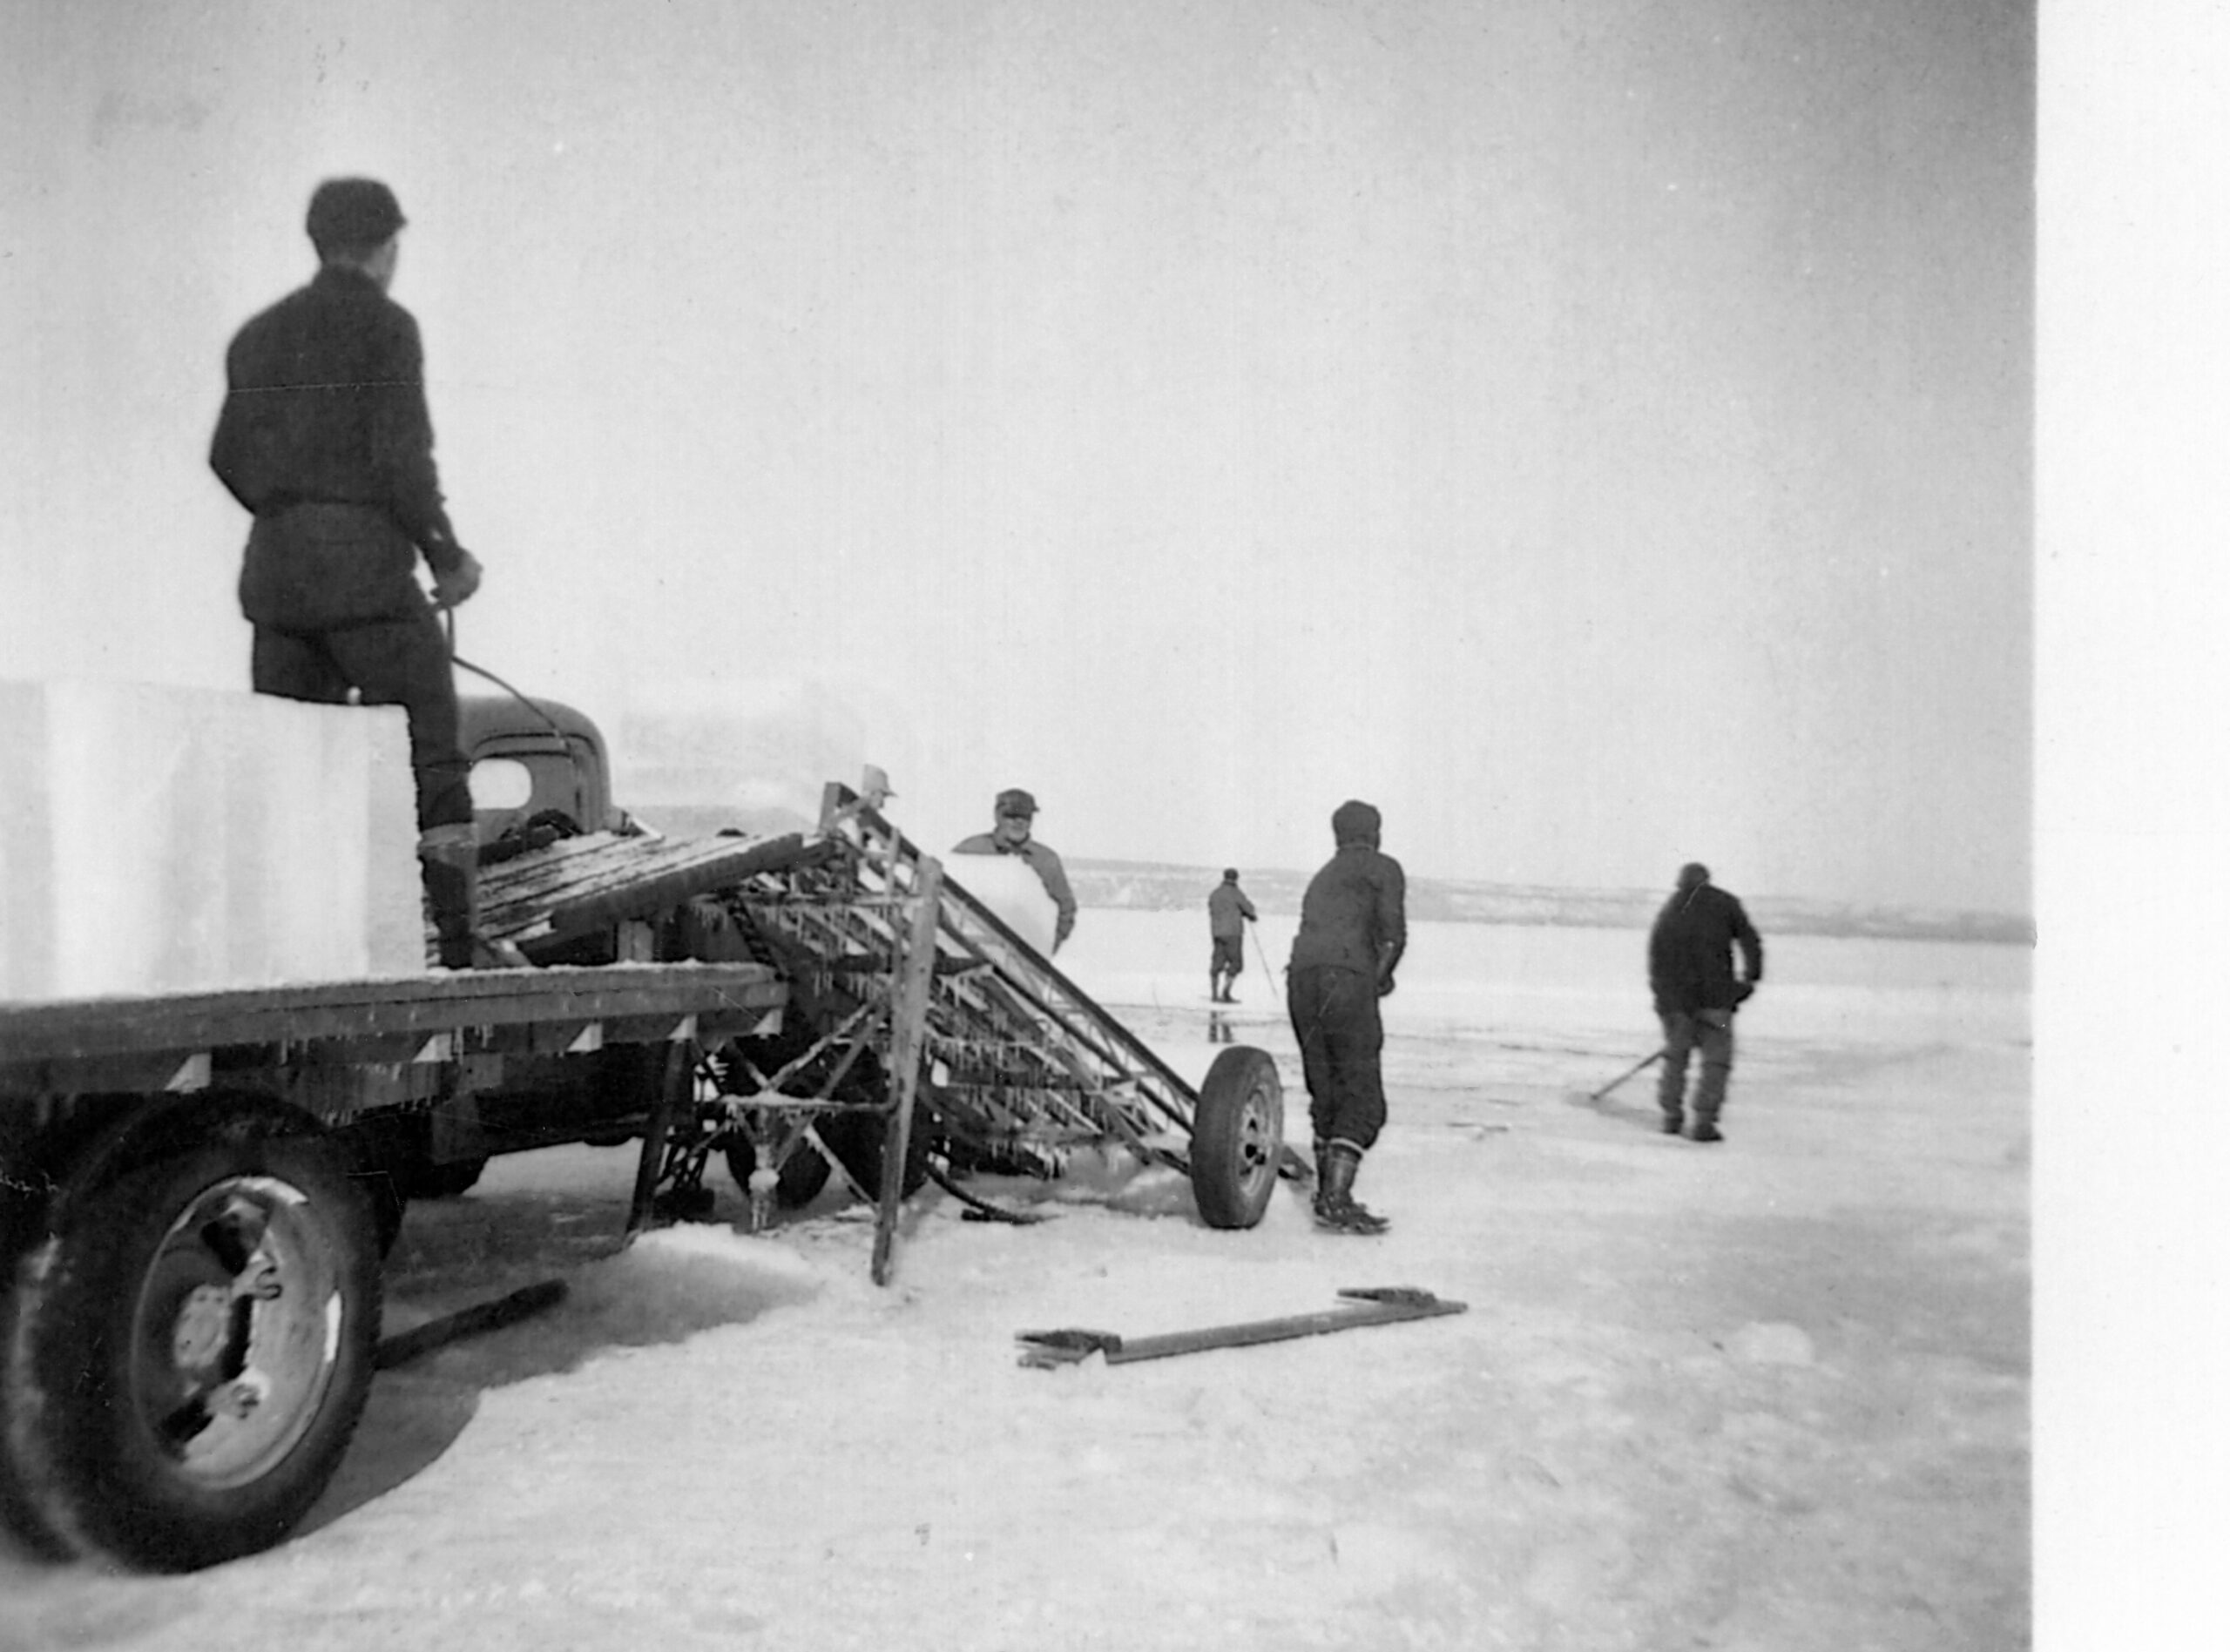 Men cutting ice blocks from St. Mary’s River for the LeBlanc Store in the Bay Mills Indian Community in Michigan, in the late 1930s or early 1940s.